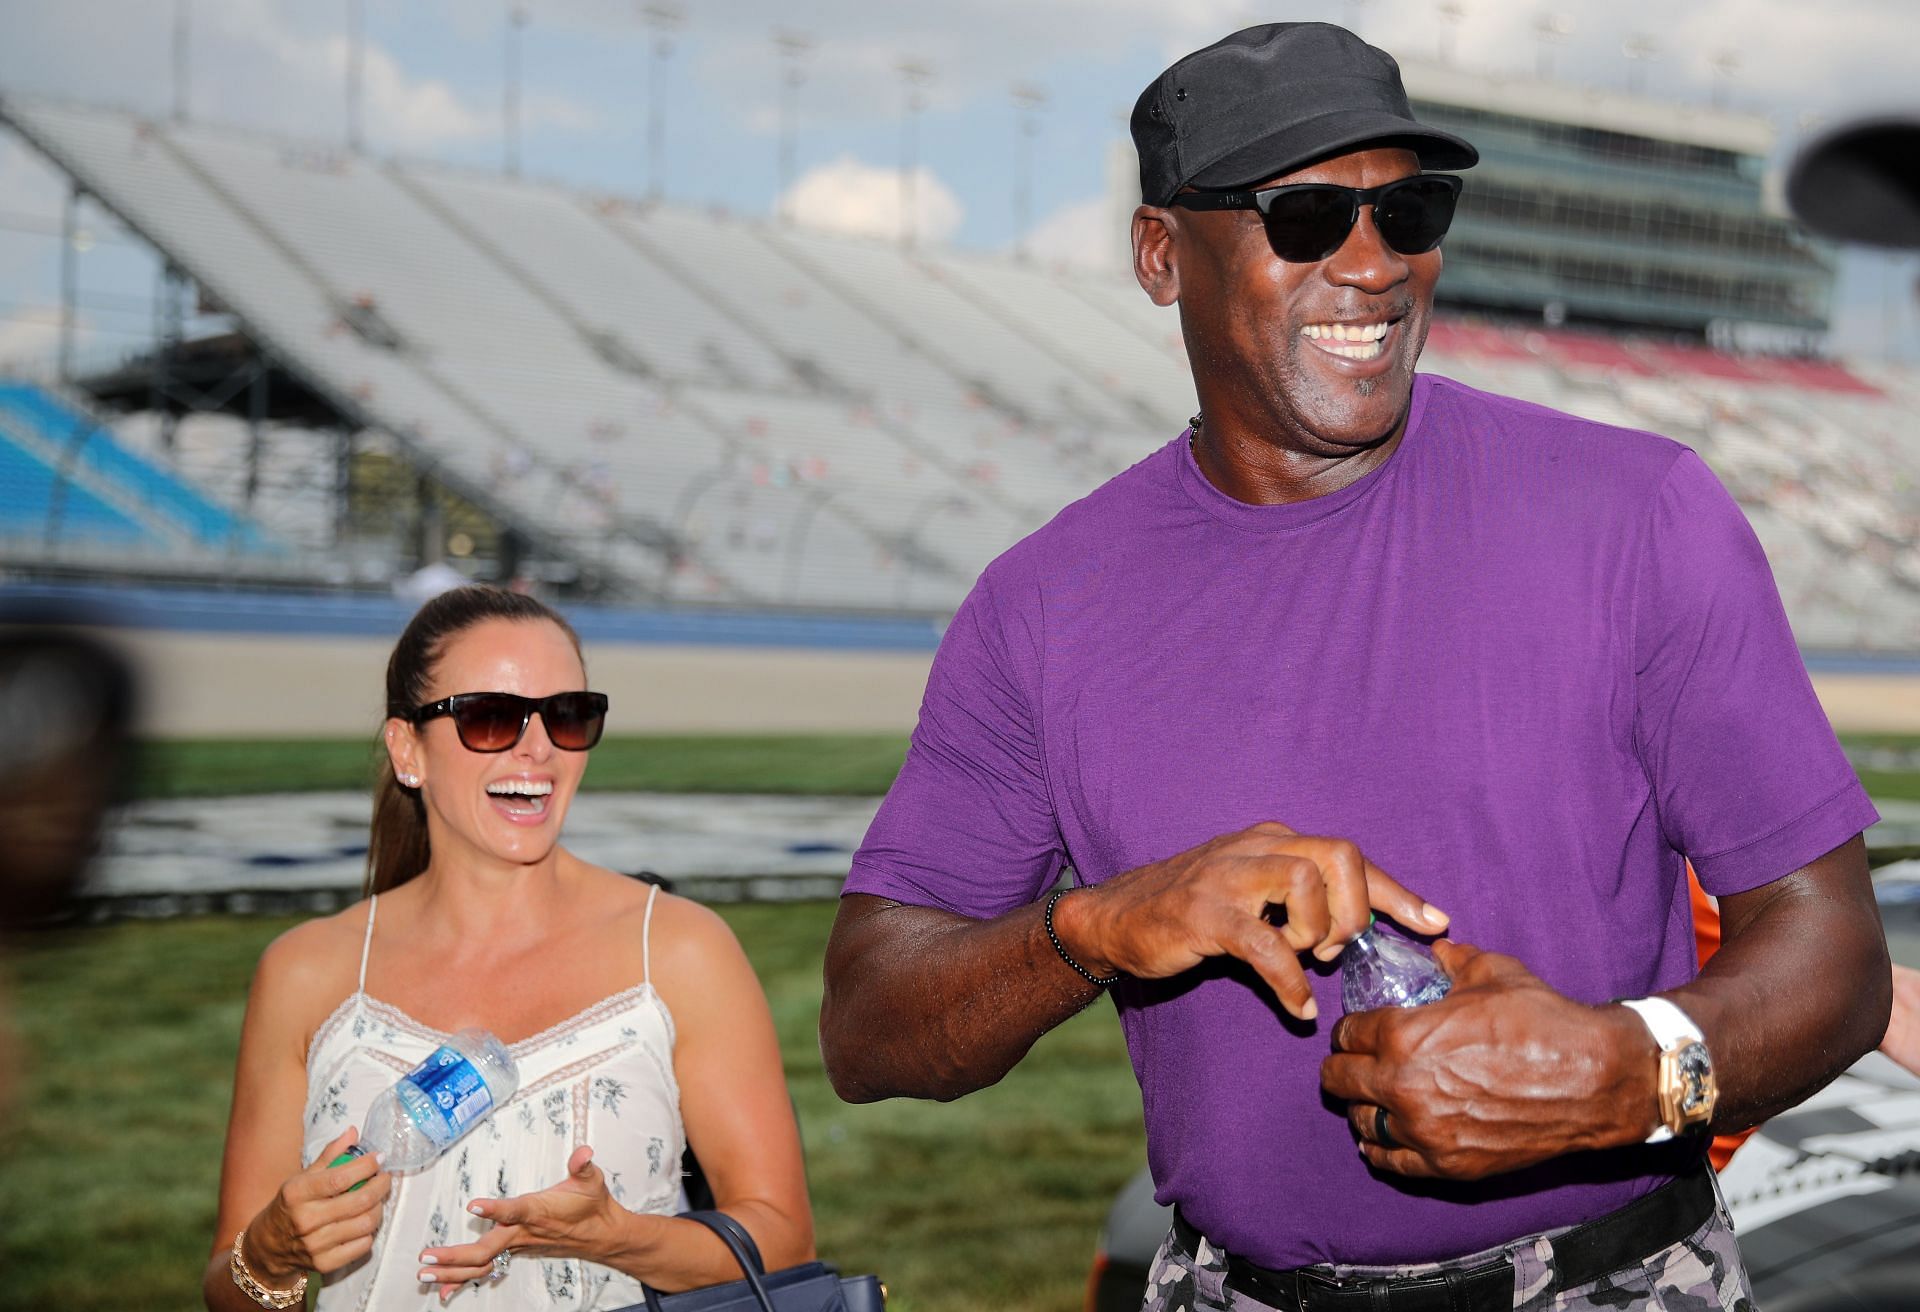 MJ with his wife, Yvette Prieto, at the NASCAR Cup Series